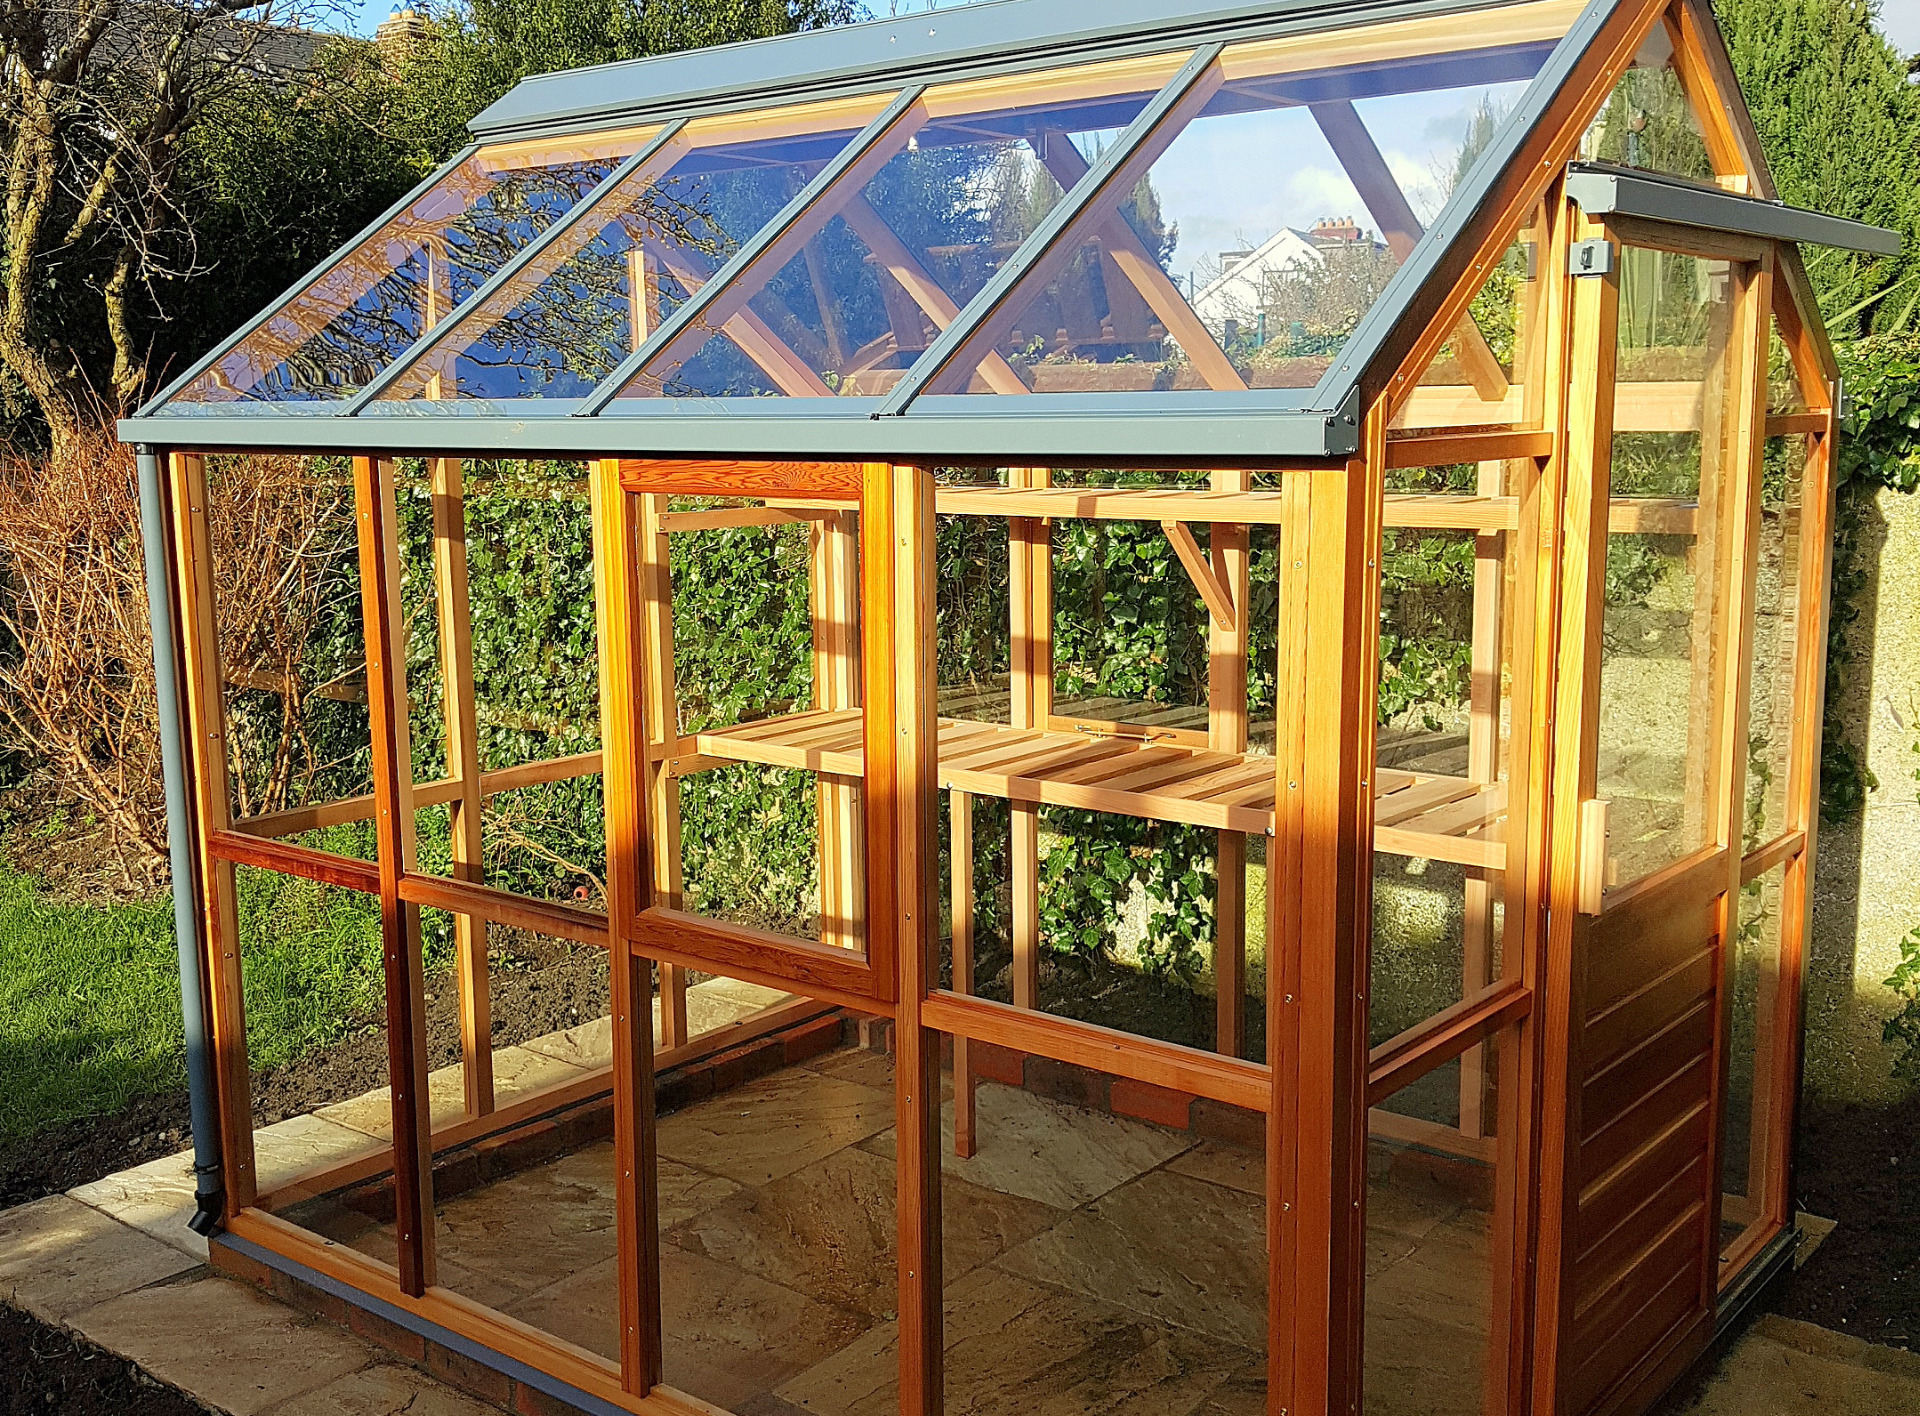 Classic Six Greenhouse (6x8) with glass base panels, sliding door and UV timber protection | Classic Timber Greenhouses supplied + fitted by Owen Chubb nationwide. Tel 087-2306 128